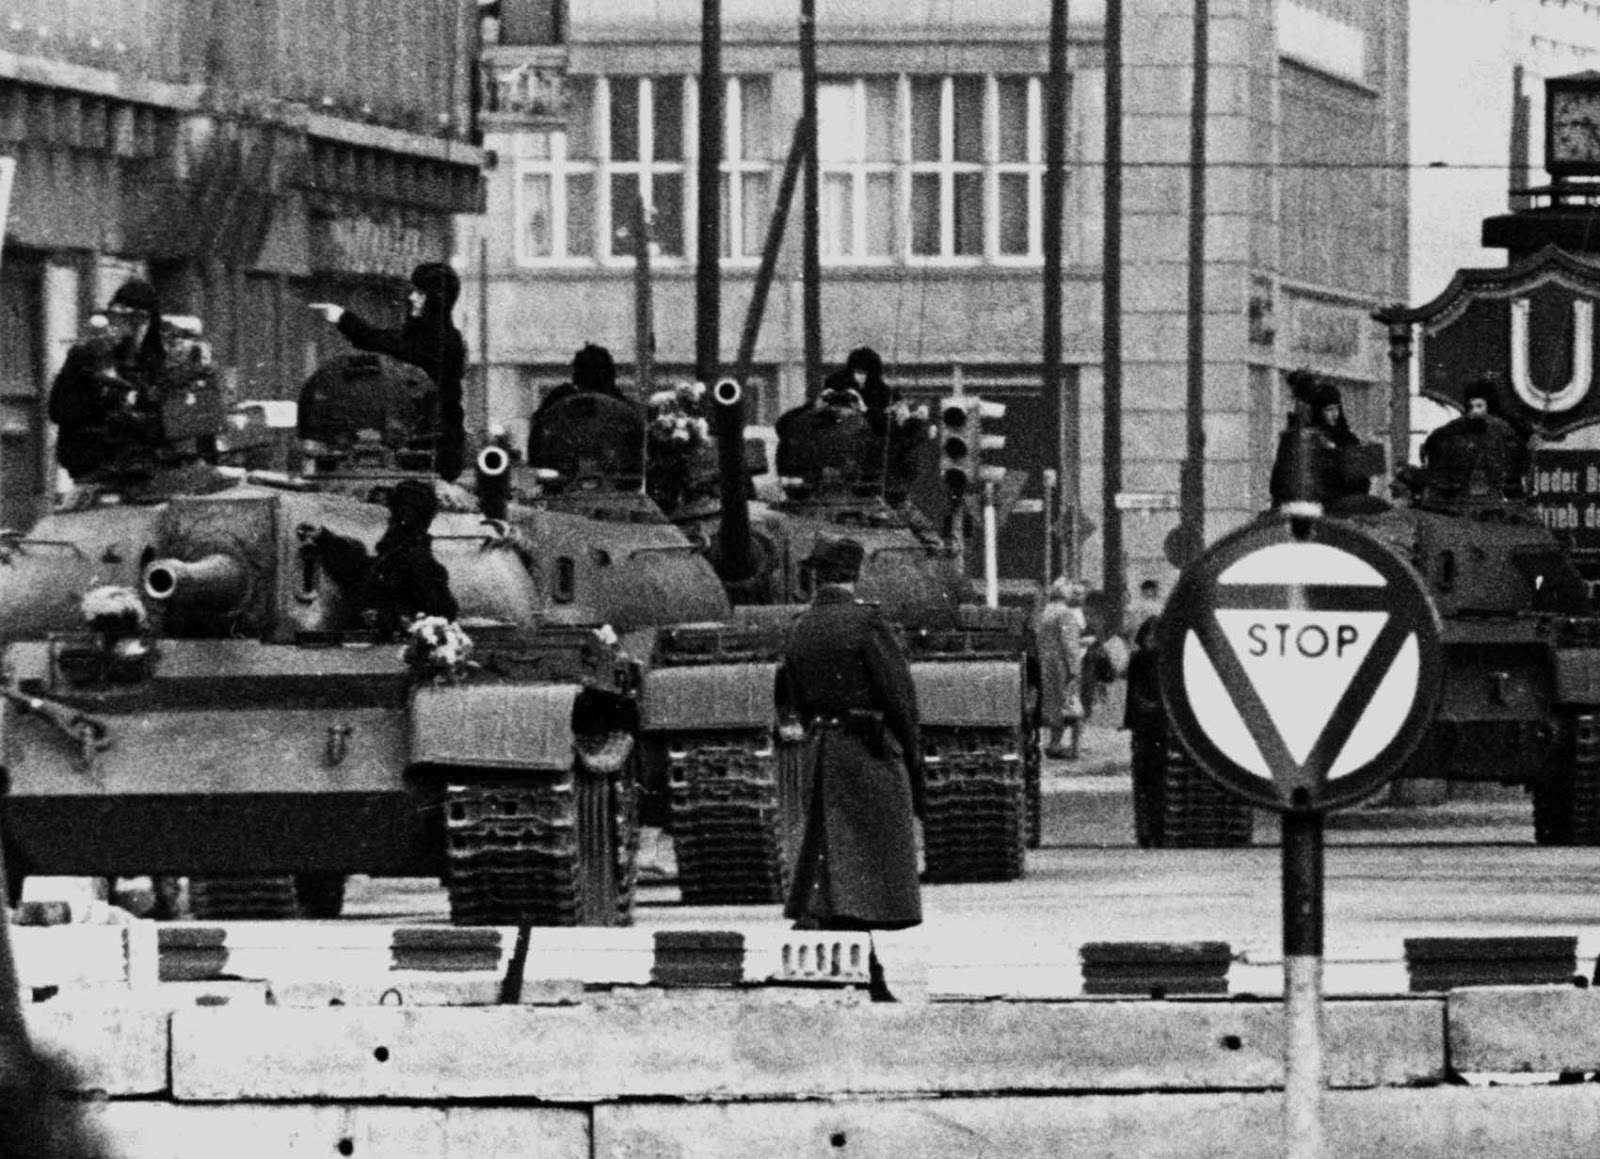 The standoff at Checkpoint Charlie Soviet tanks facing American tanks, 1961 (3)